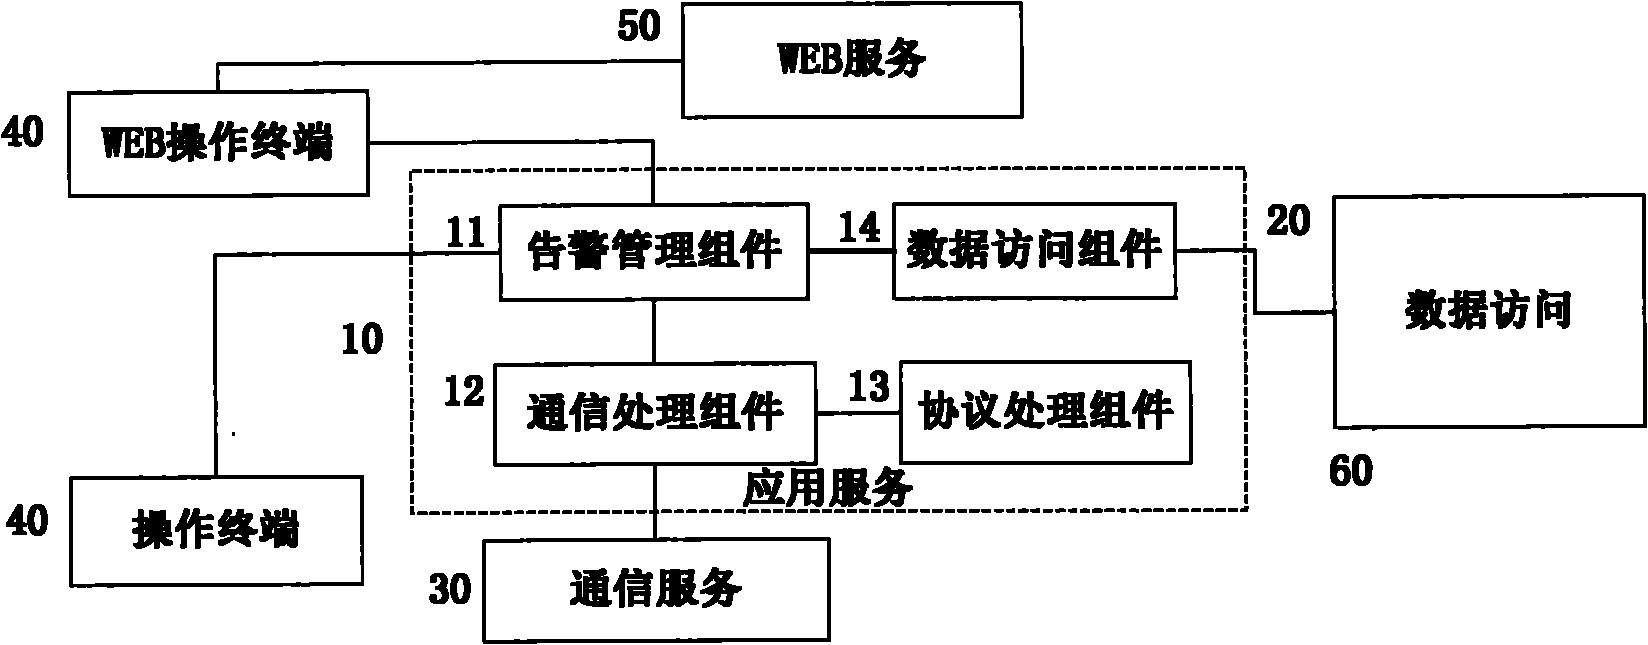 Network management and monitoring system and method for realizing parallel processing of fault alarms thereof